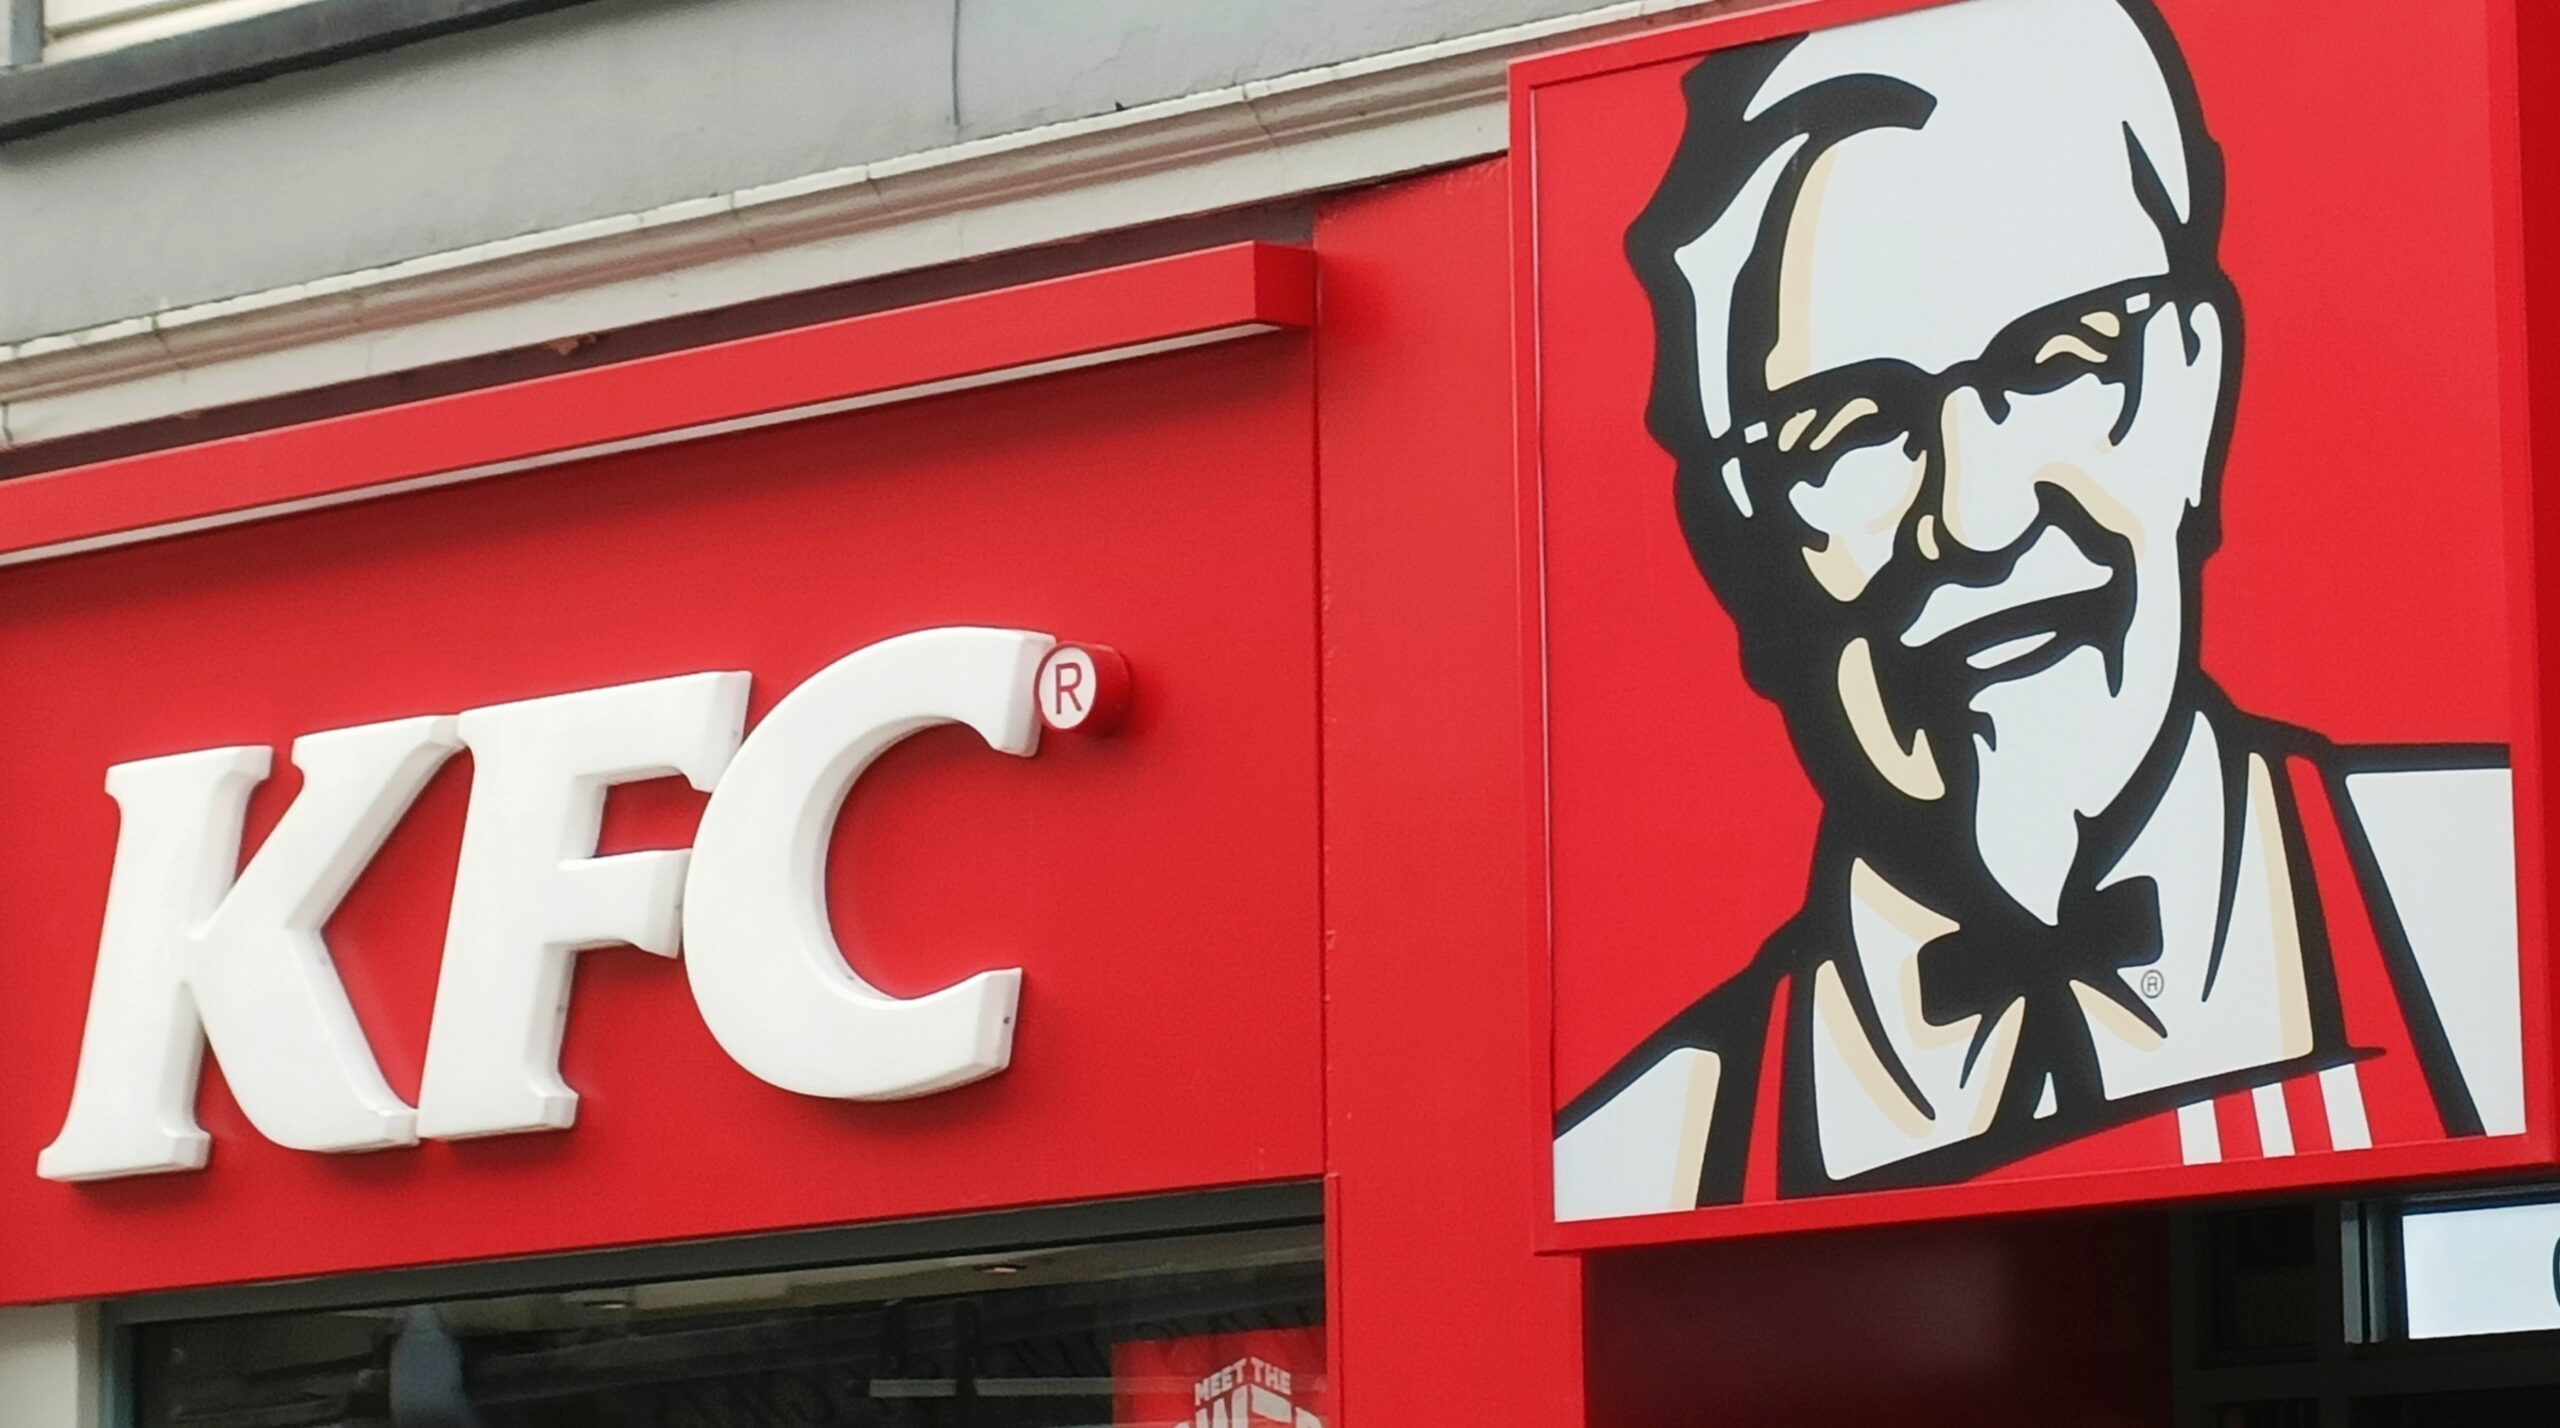 New KFC complimentary outlet to be considered for Rhondda